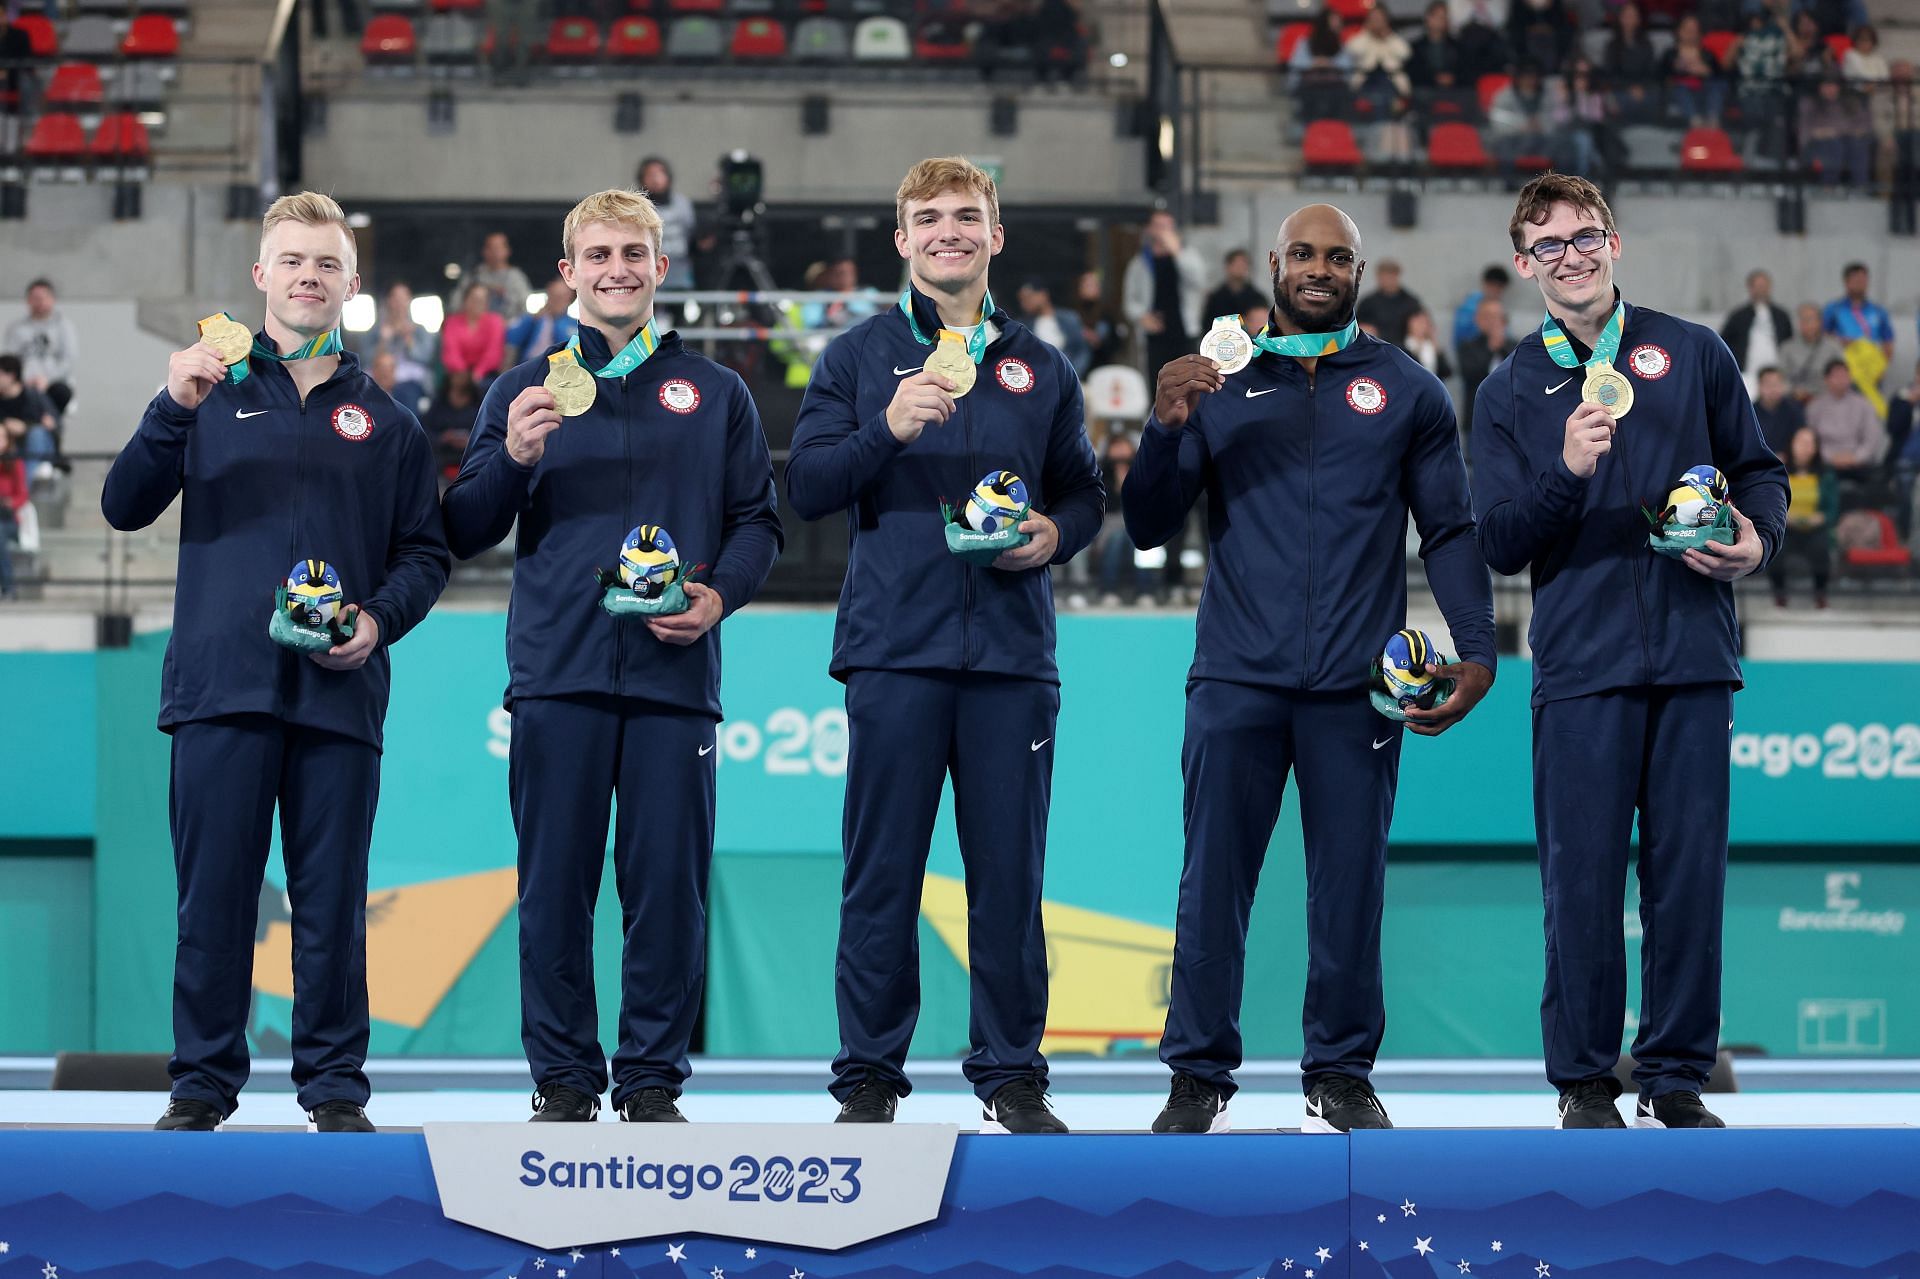 Cameron Bock, Colt Walker, Curran Phillips, Donnell Whittenburg, and Stephen Nedoroscik of Team USA pose on the podium after winning the gold medal in the Men&#039;s Team Final at the 2023 Pan American Games in Santiago, Chile.